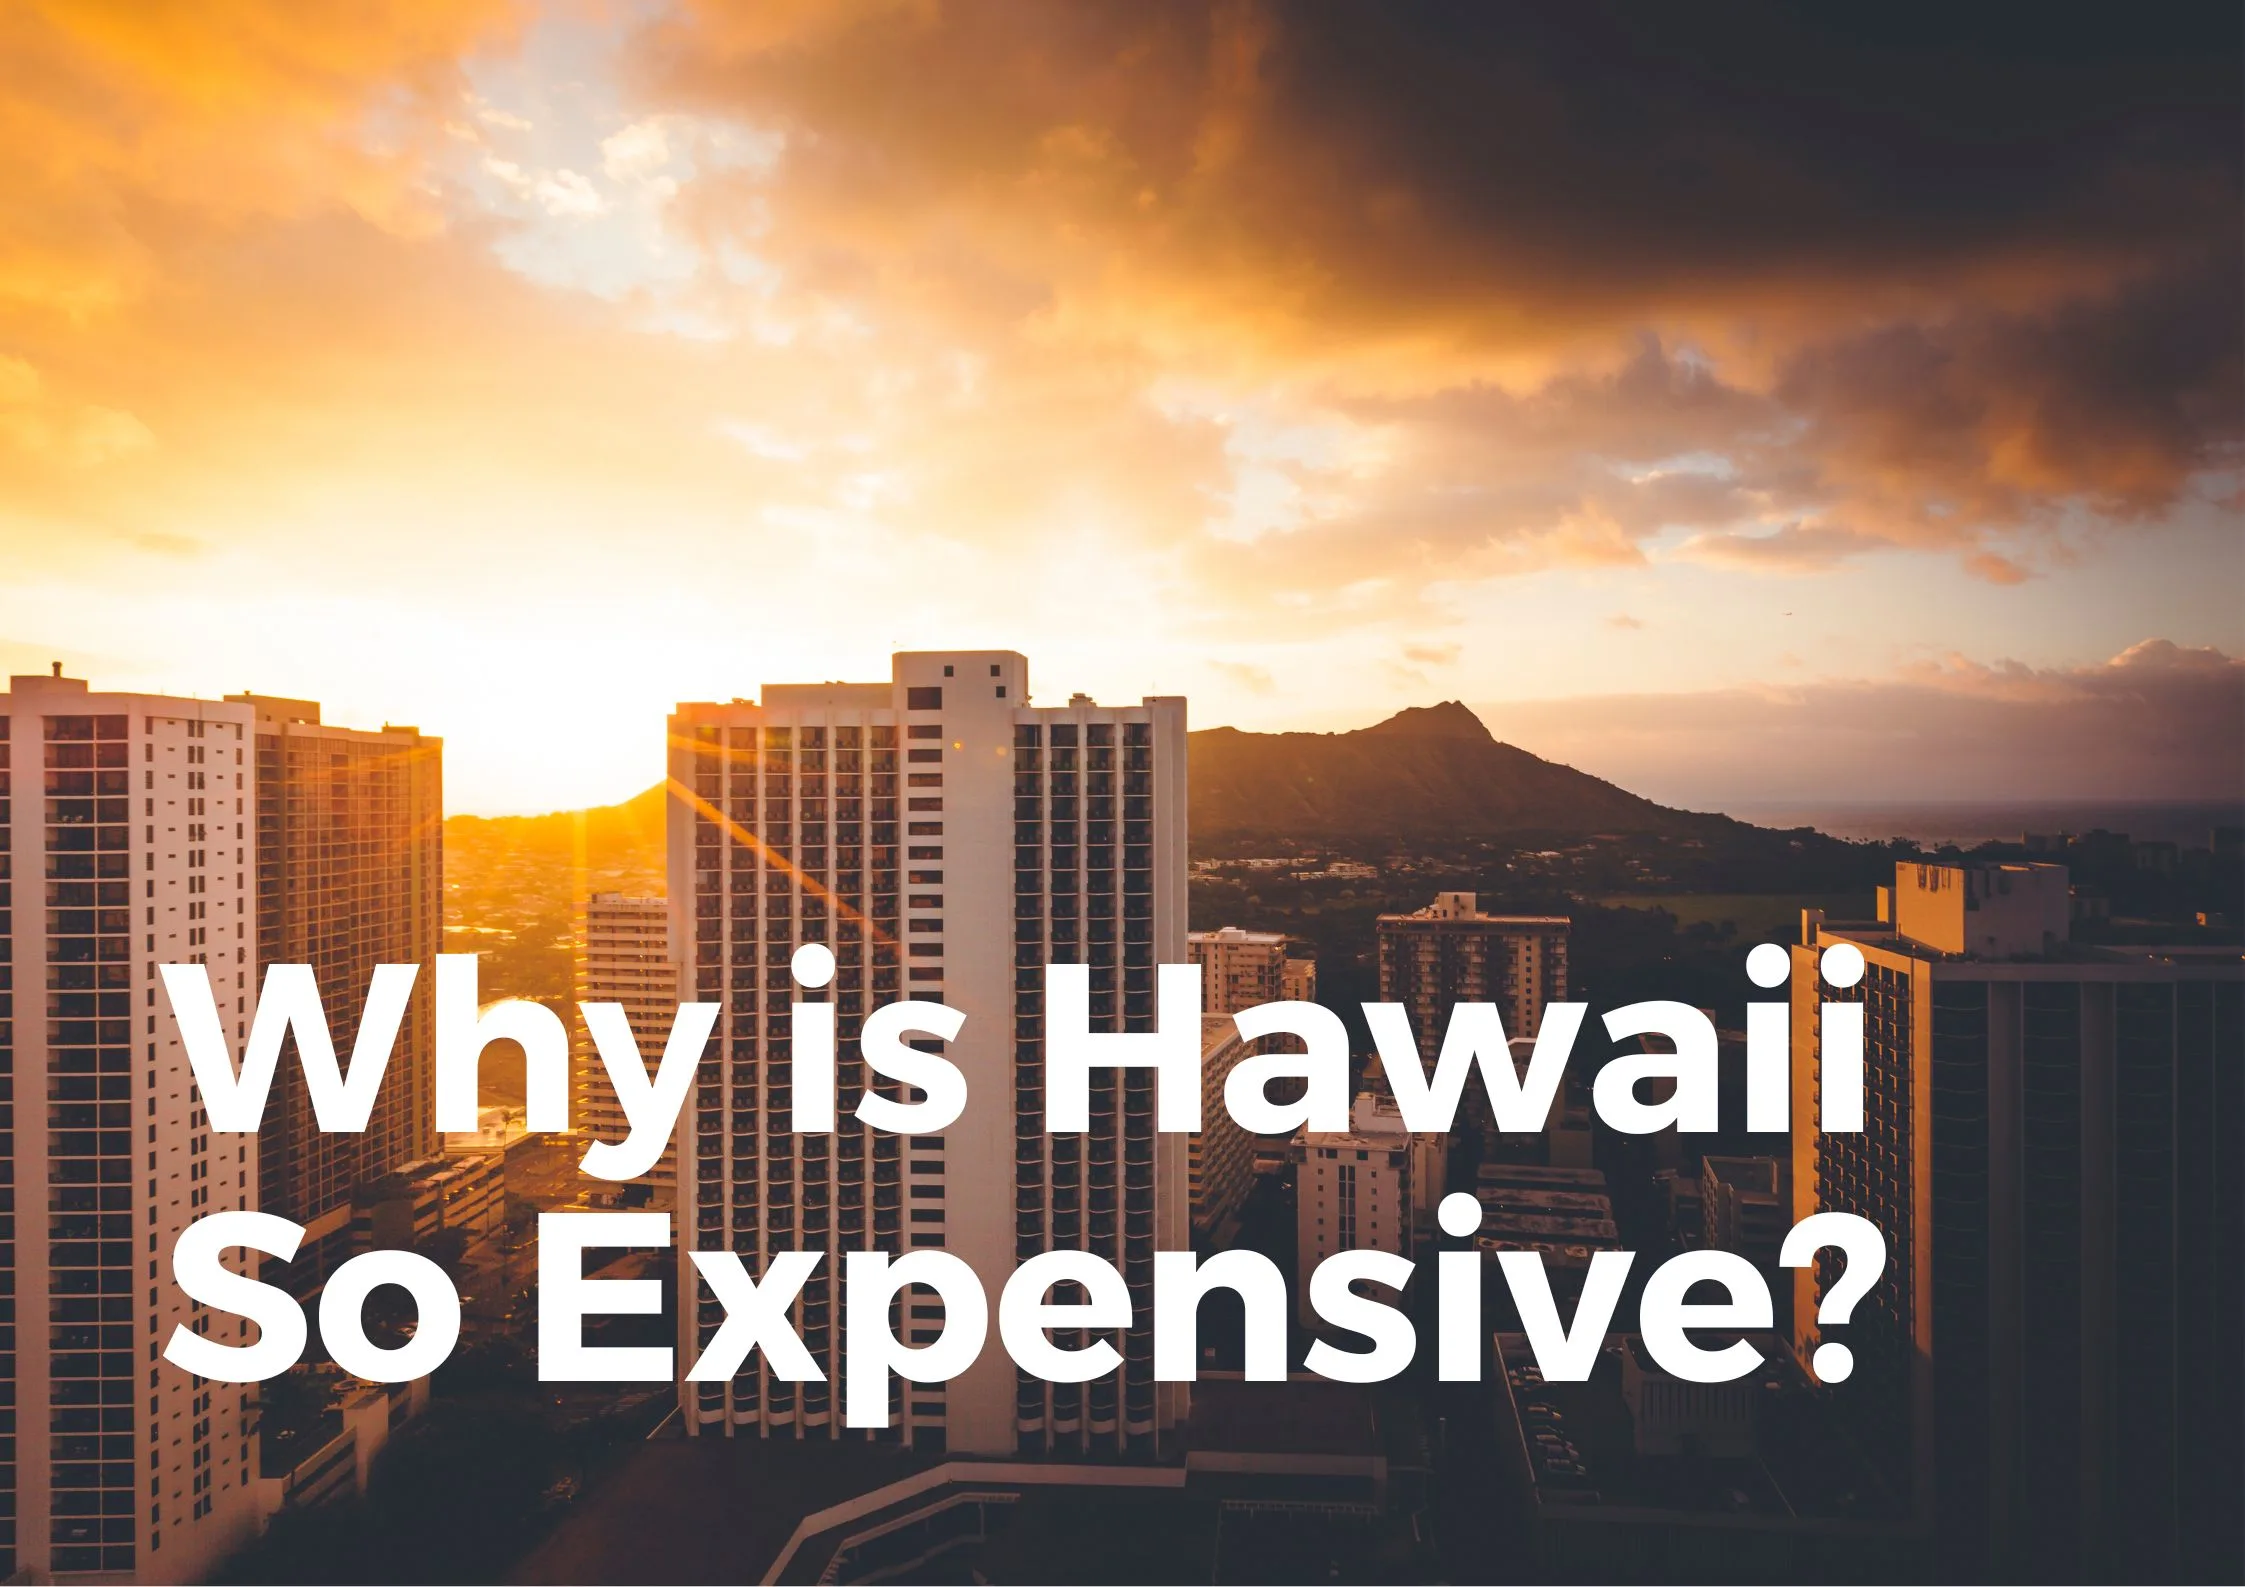 Why is Hawaii so expensive